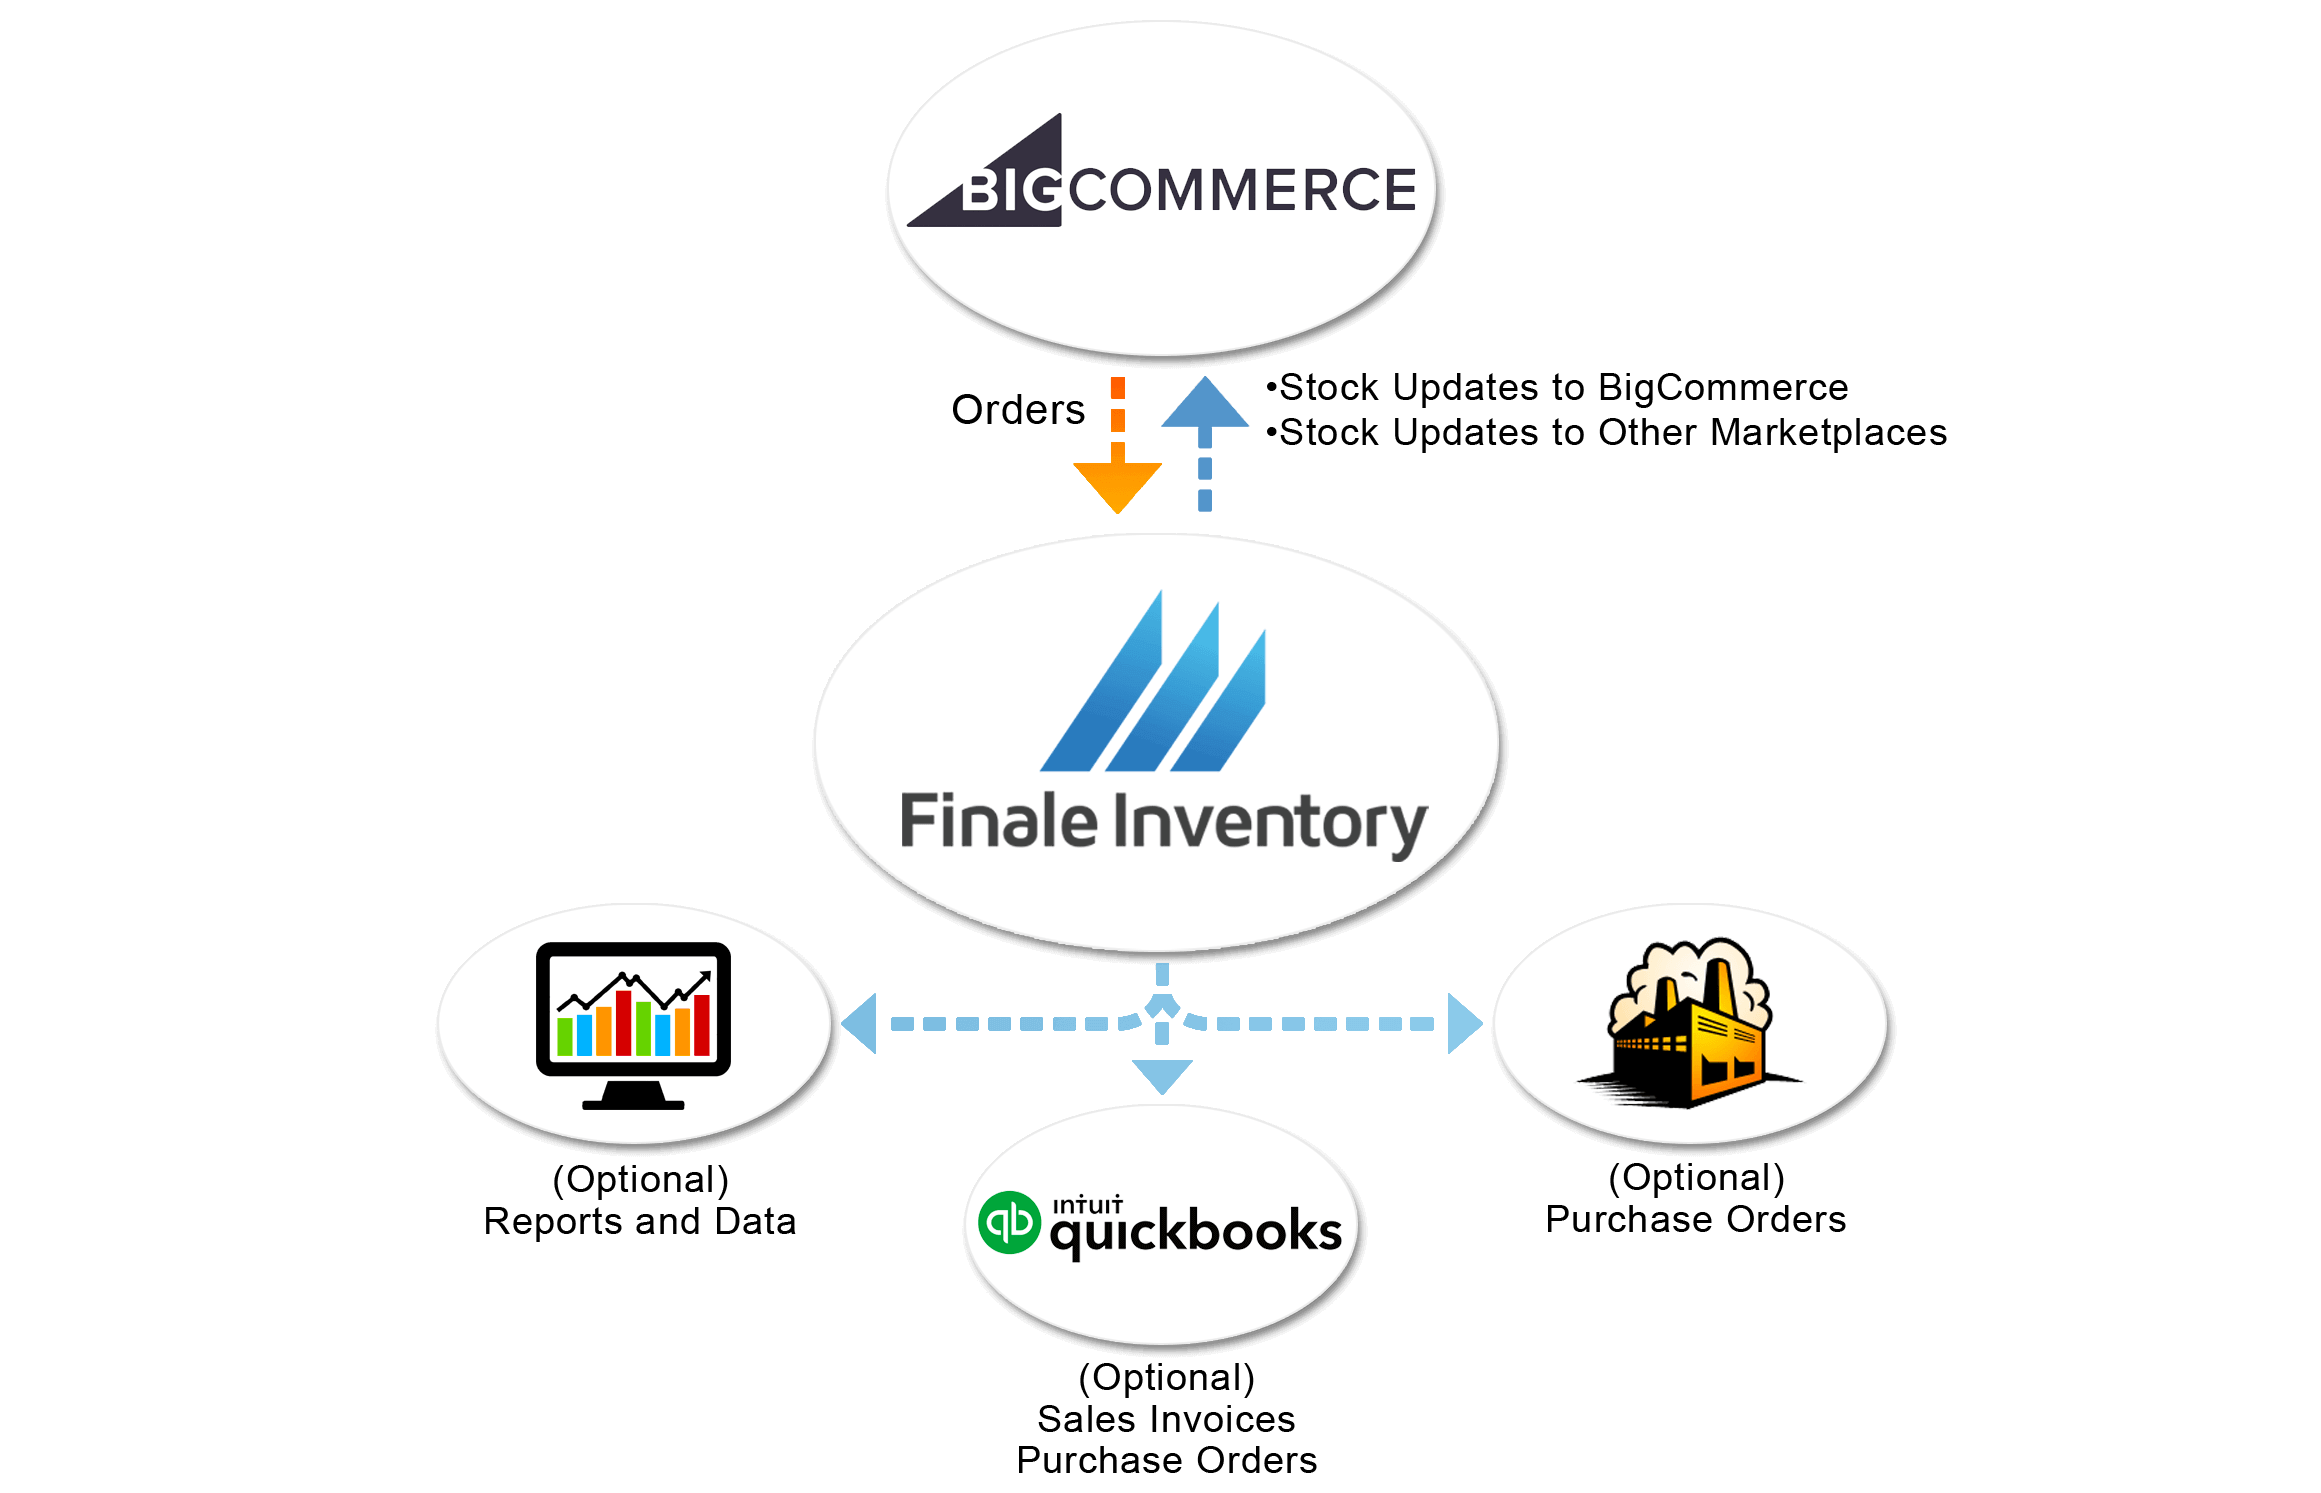 BigCommerce Finale Inventory inventory management software integration flow chart. 